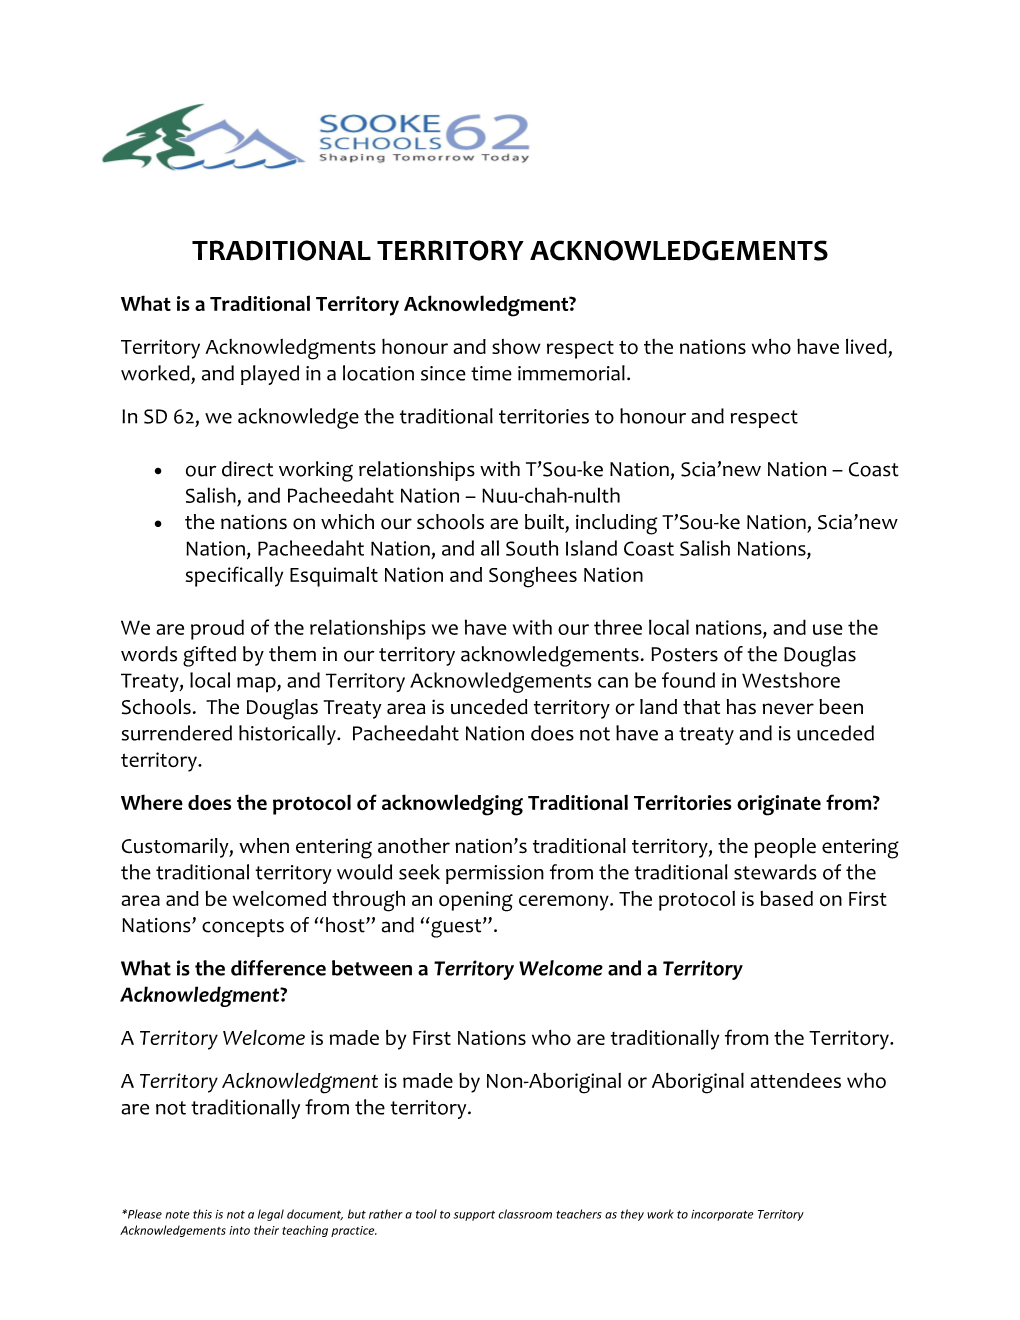 What Is a Traditional Territory Acknowledgment?